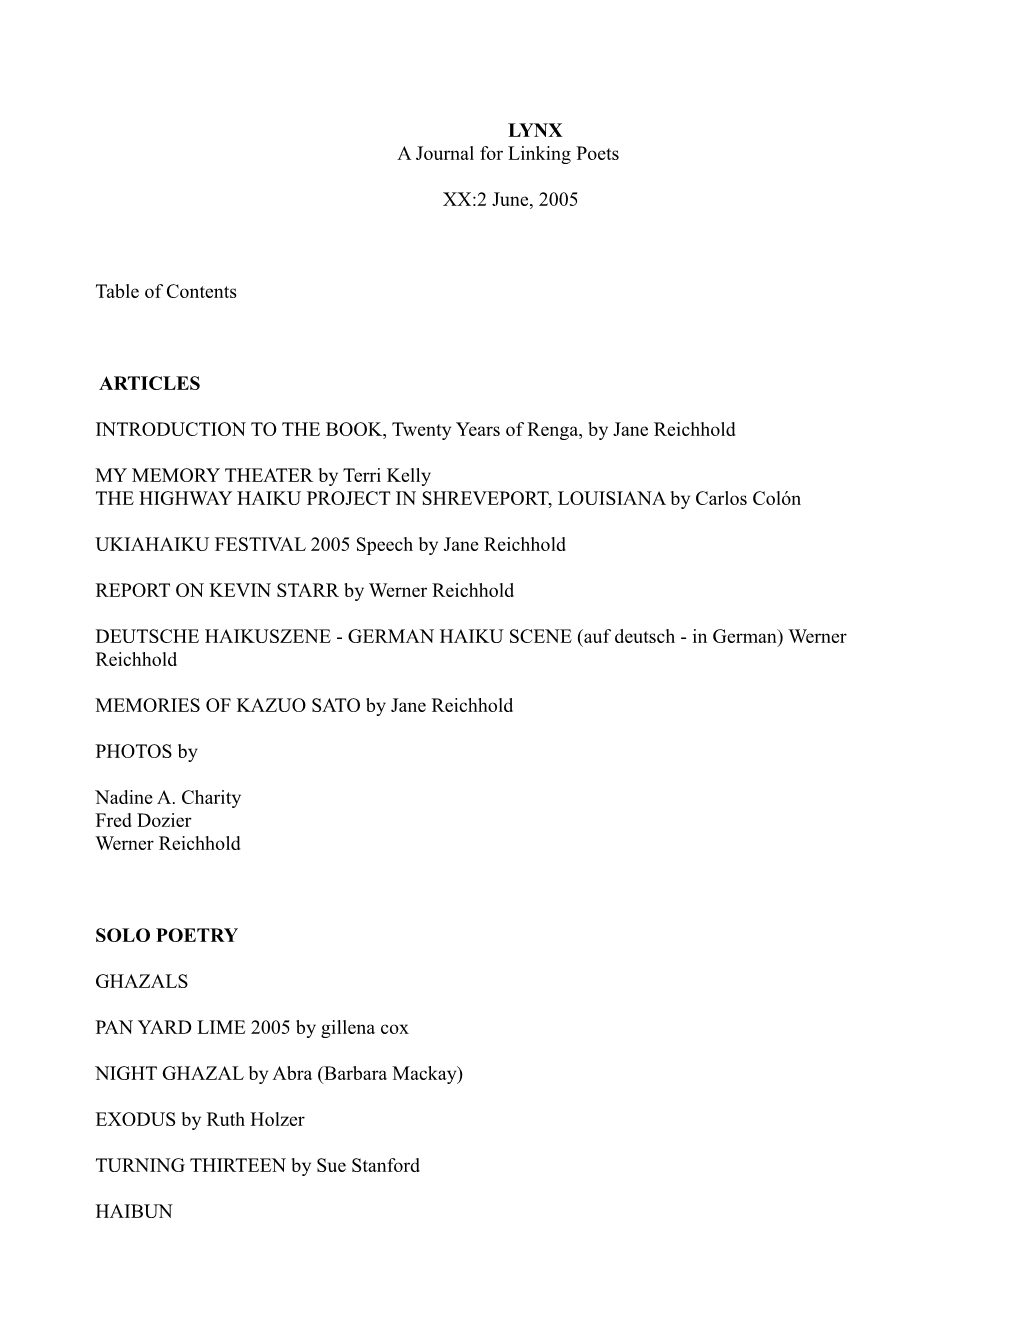 LYNX a Journal for Linking Poets XX:2 June, 2005 Table of Contents